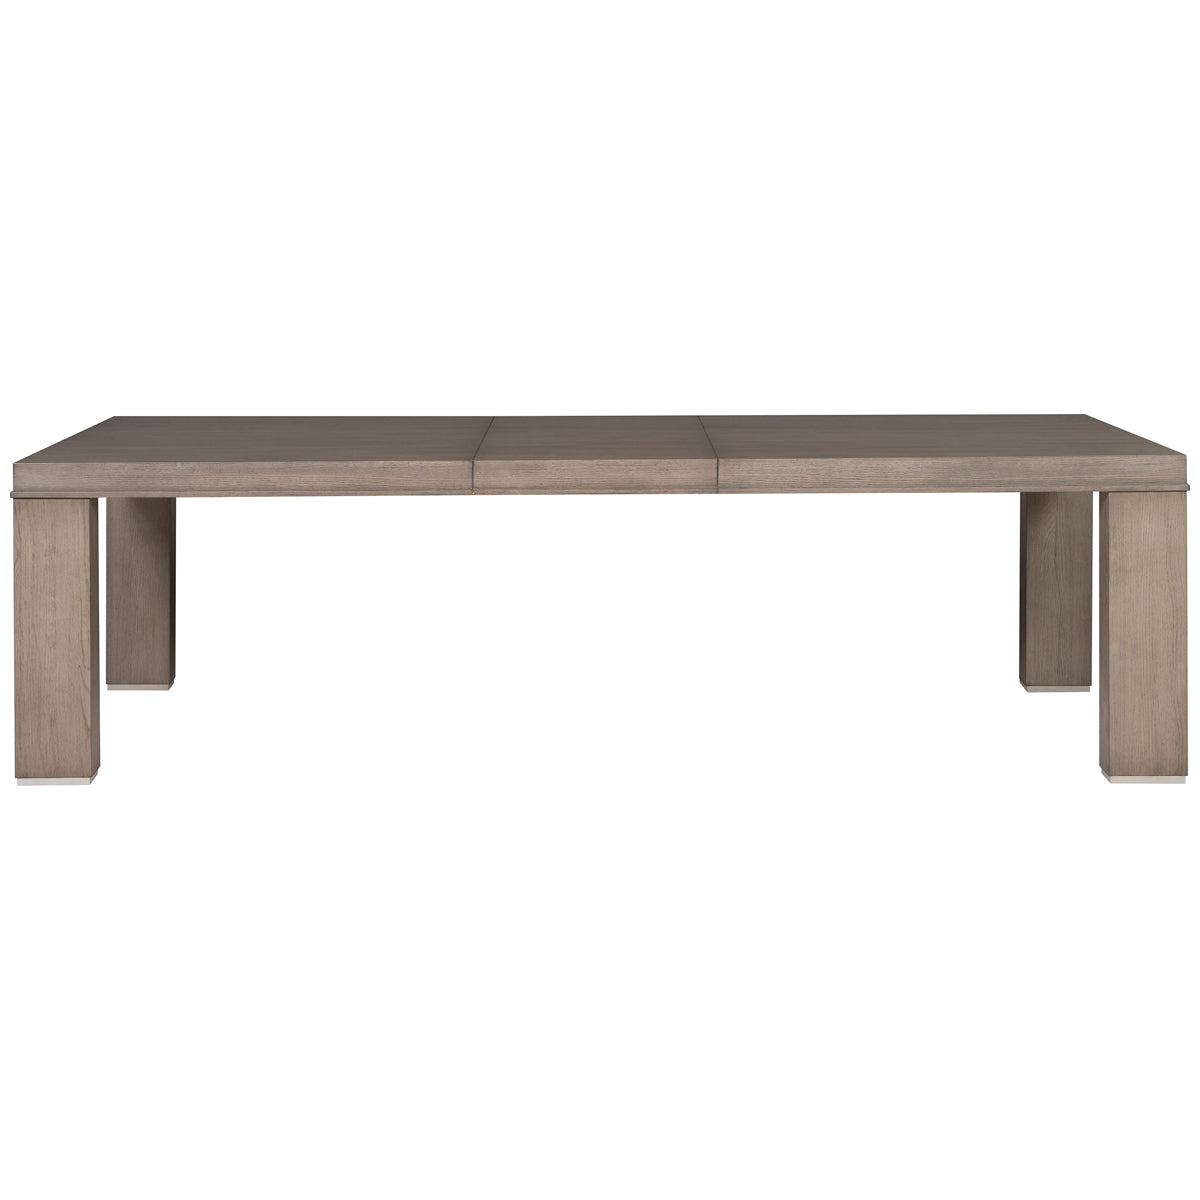 Vanguard Furniture Modern Dining Table with Leaf